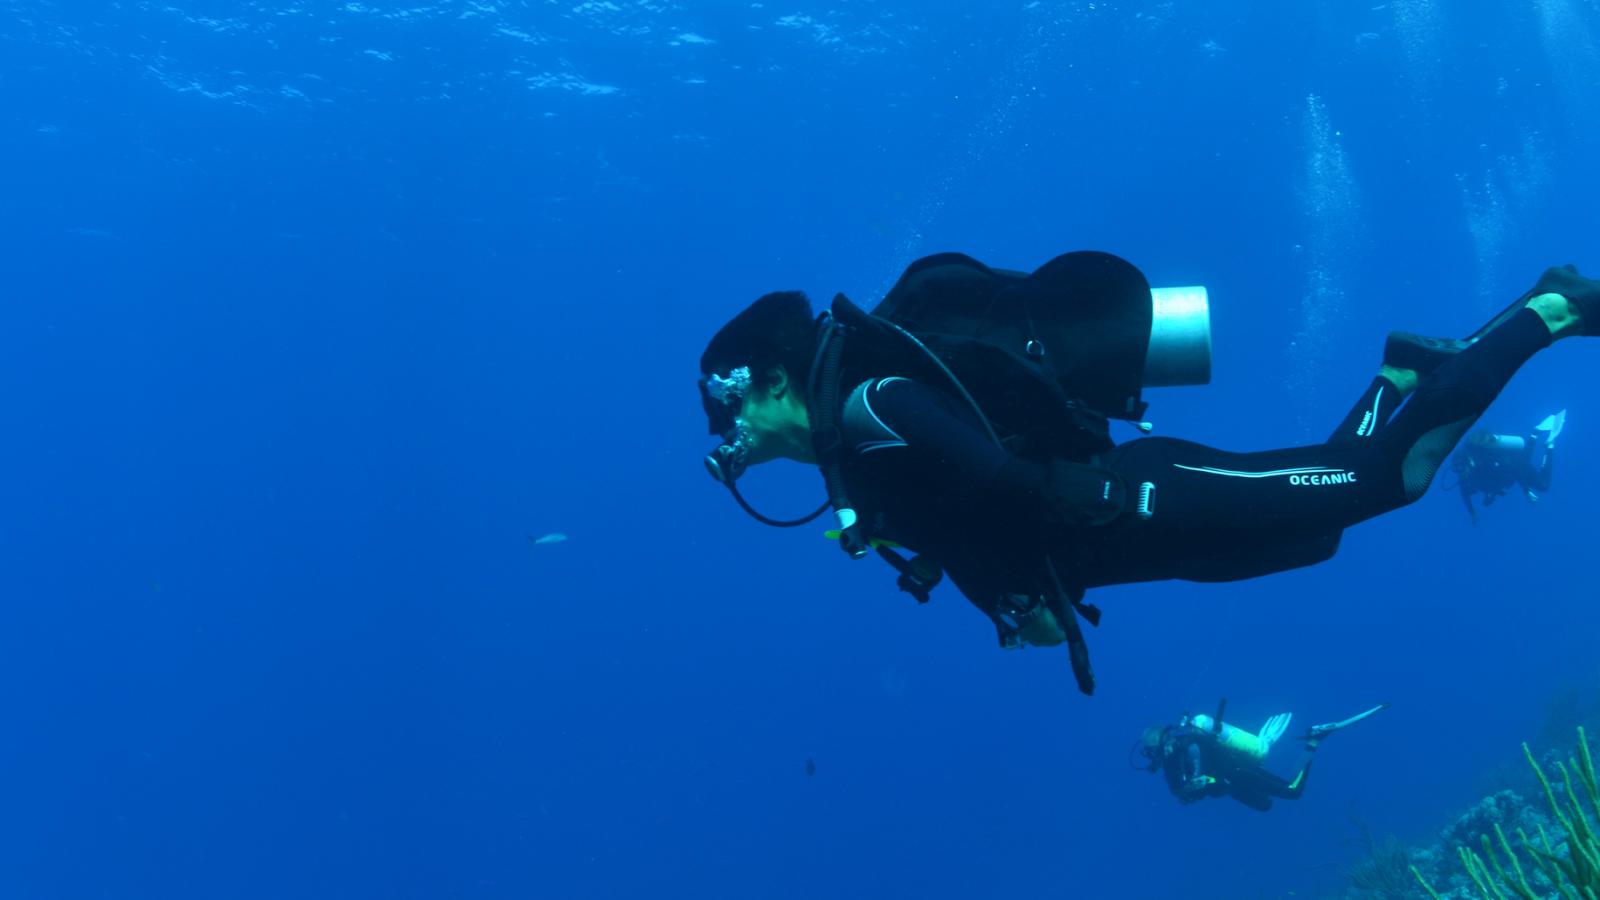 Diving into the Blue in Turks+Caicos